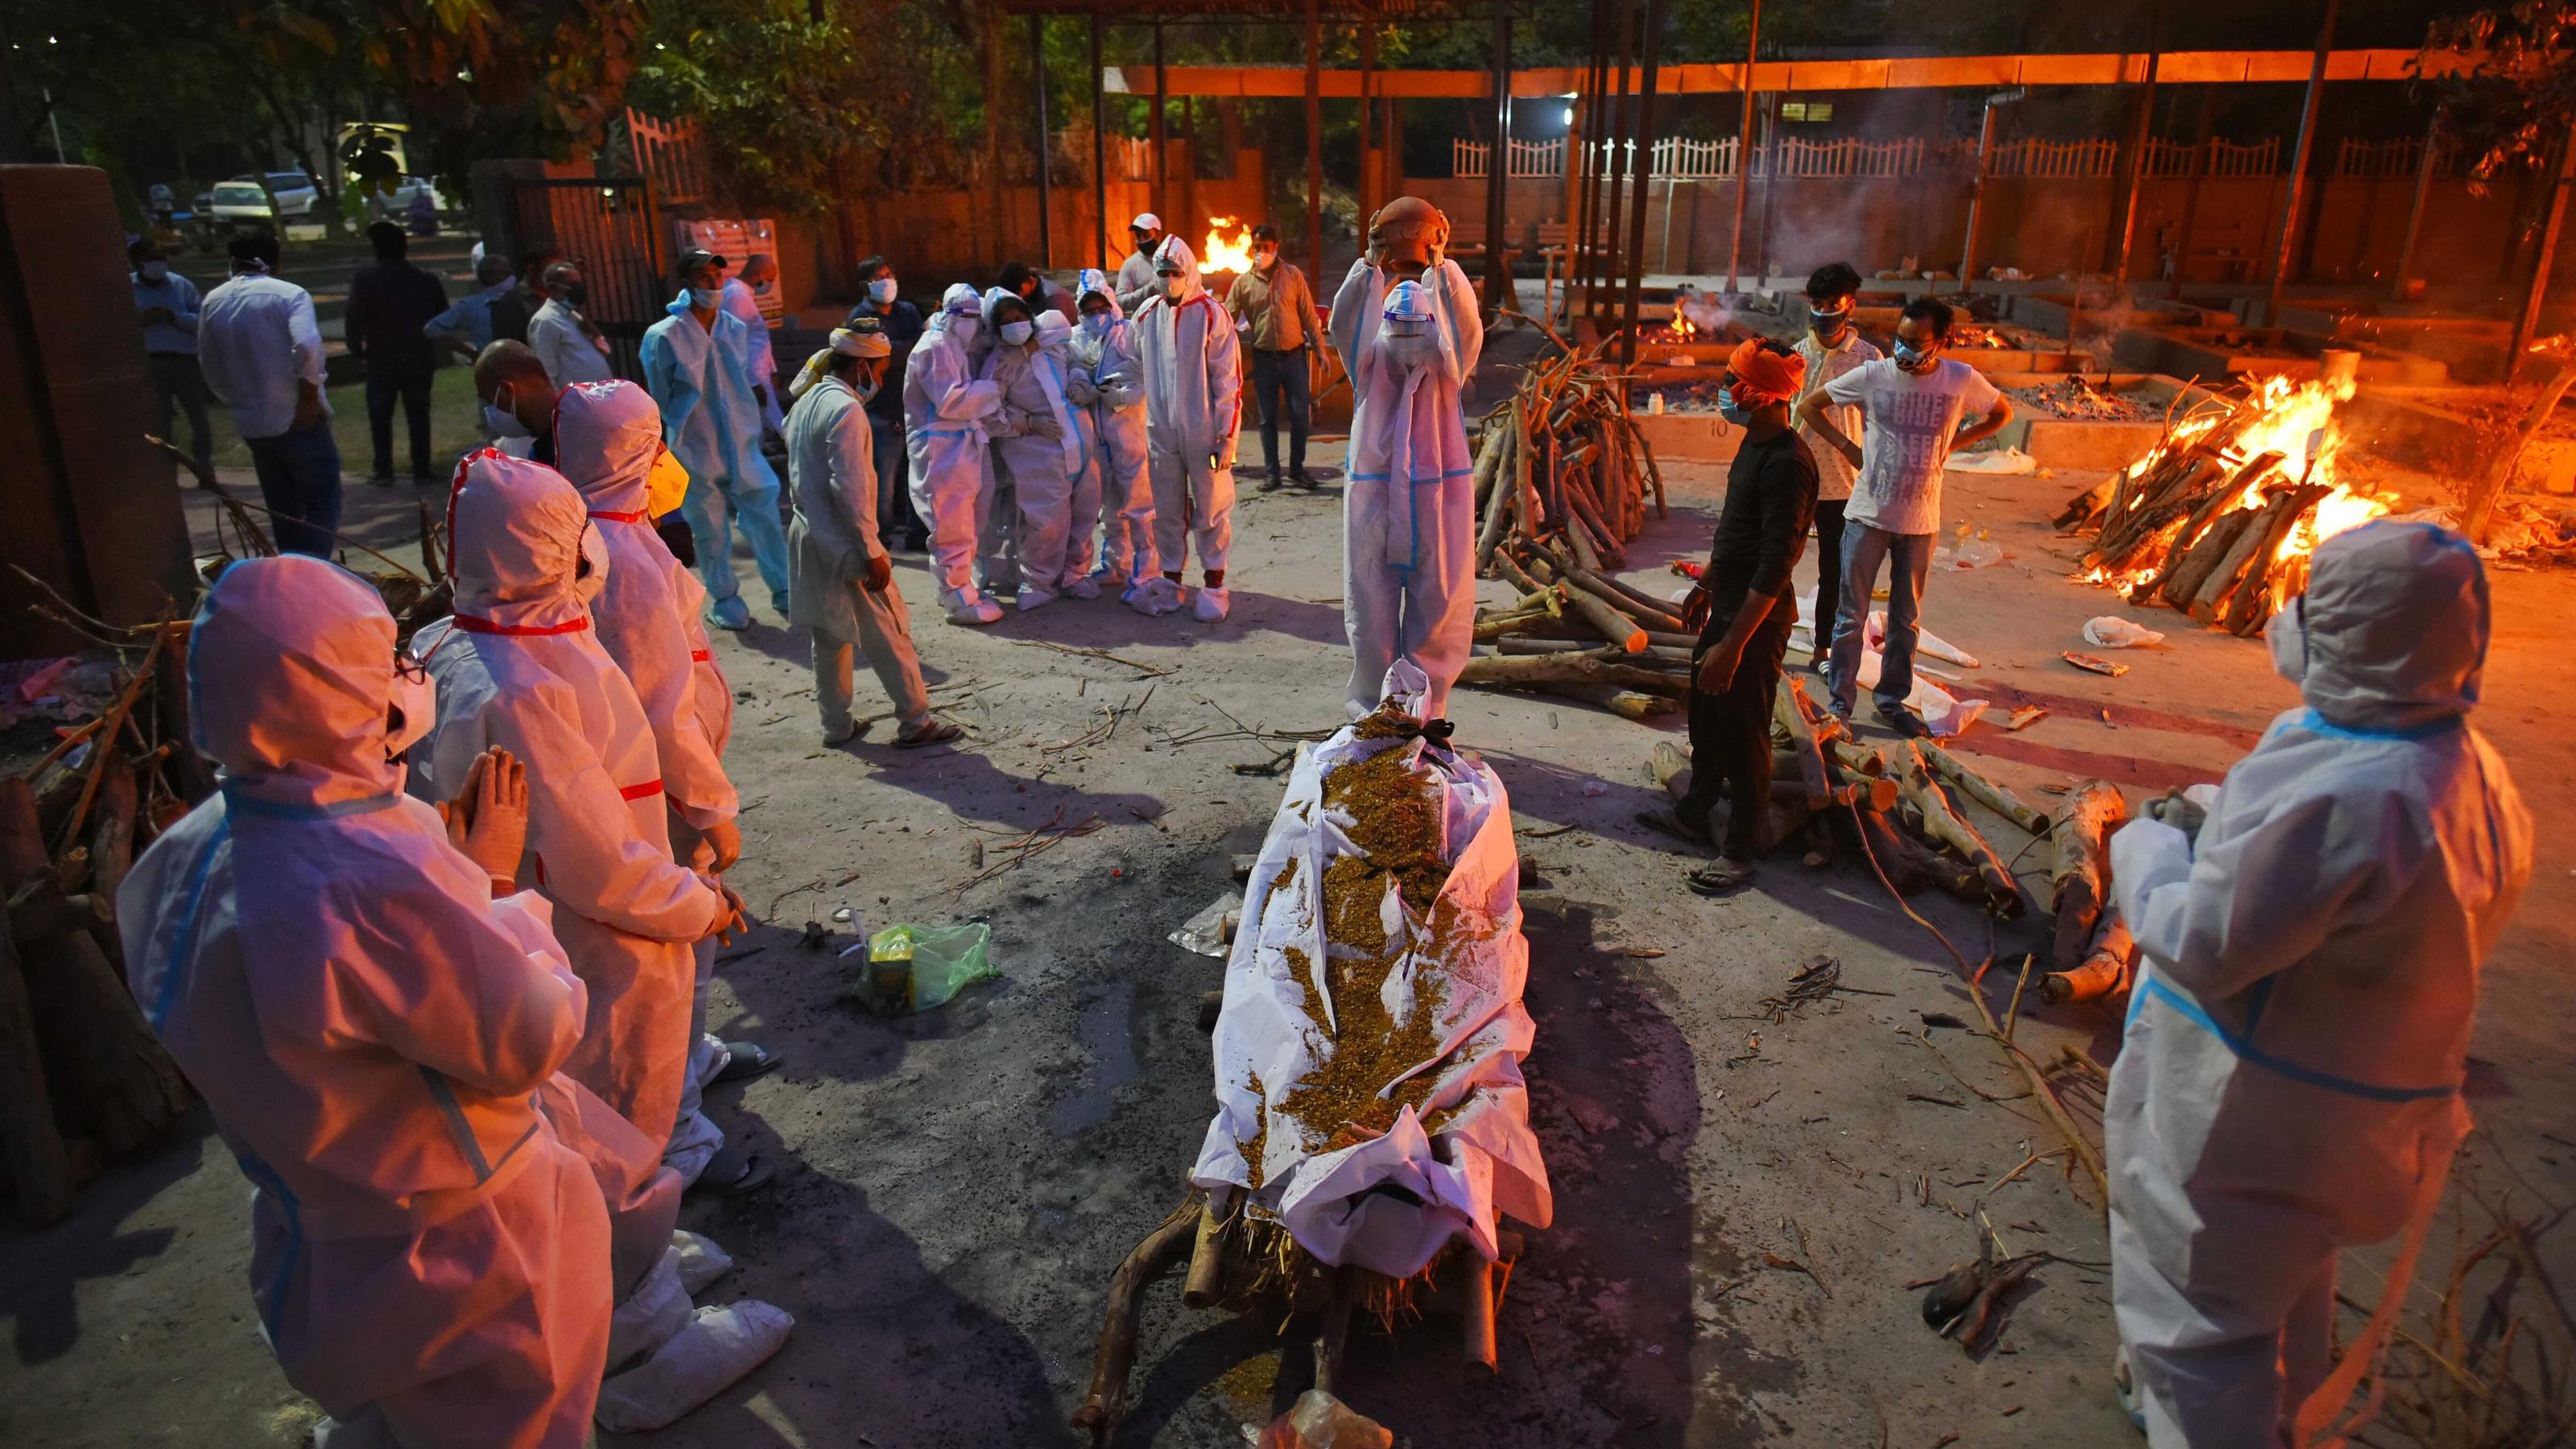  NEW DELHI, INDIA - APRIL 26: Relatives of a Covid-19 victim performing the last rites, at Sarai Kale Khan crematorium, on April 26, 2021 in New Delhi, India. India has registered 2,762 new deaths and 319,315 new infections recording more than 300,00